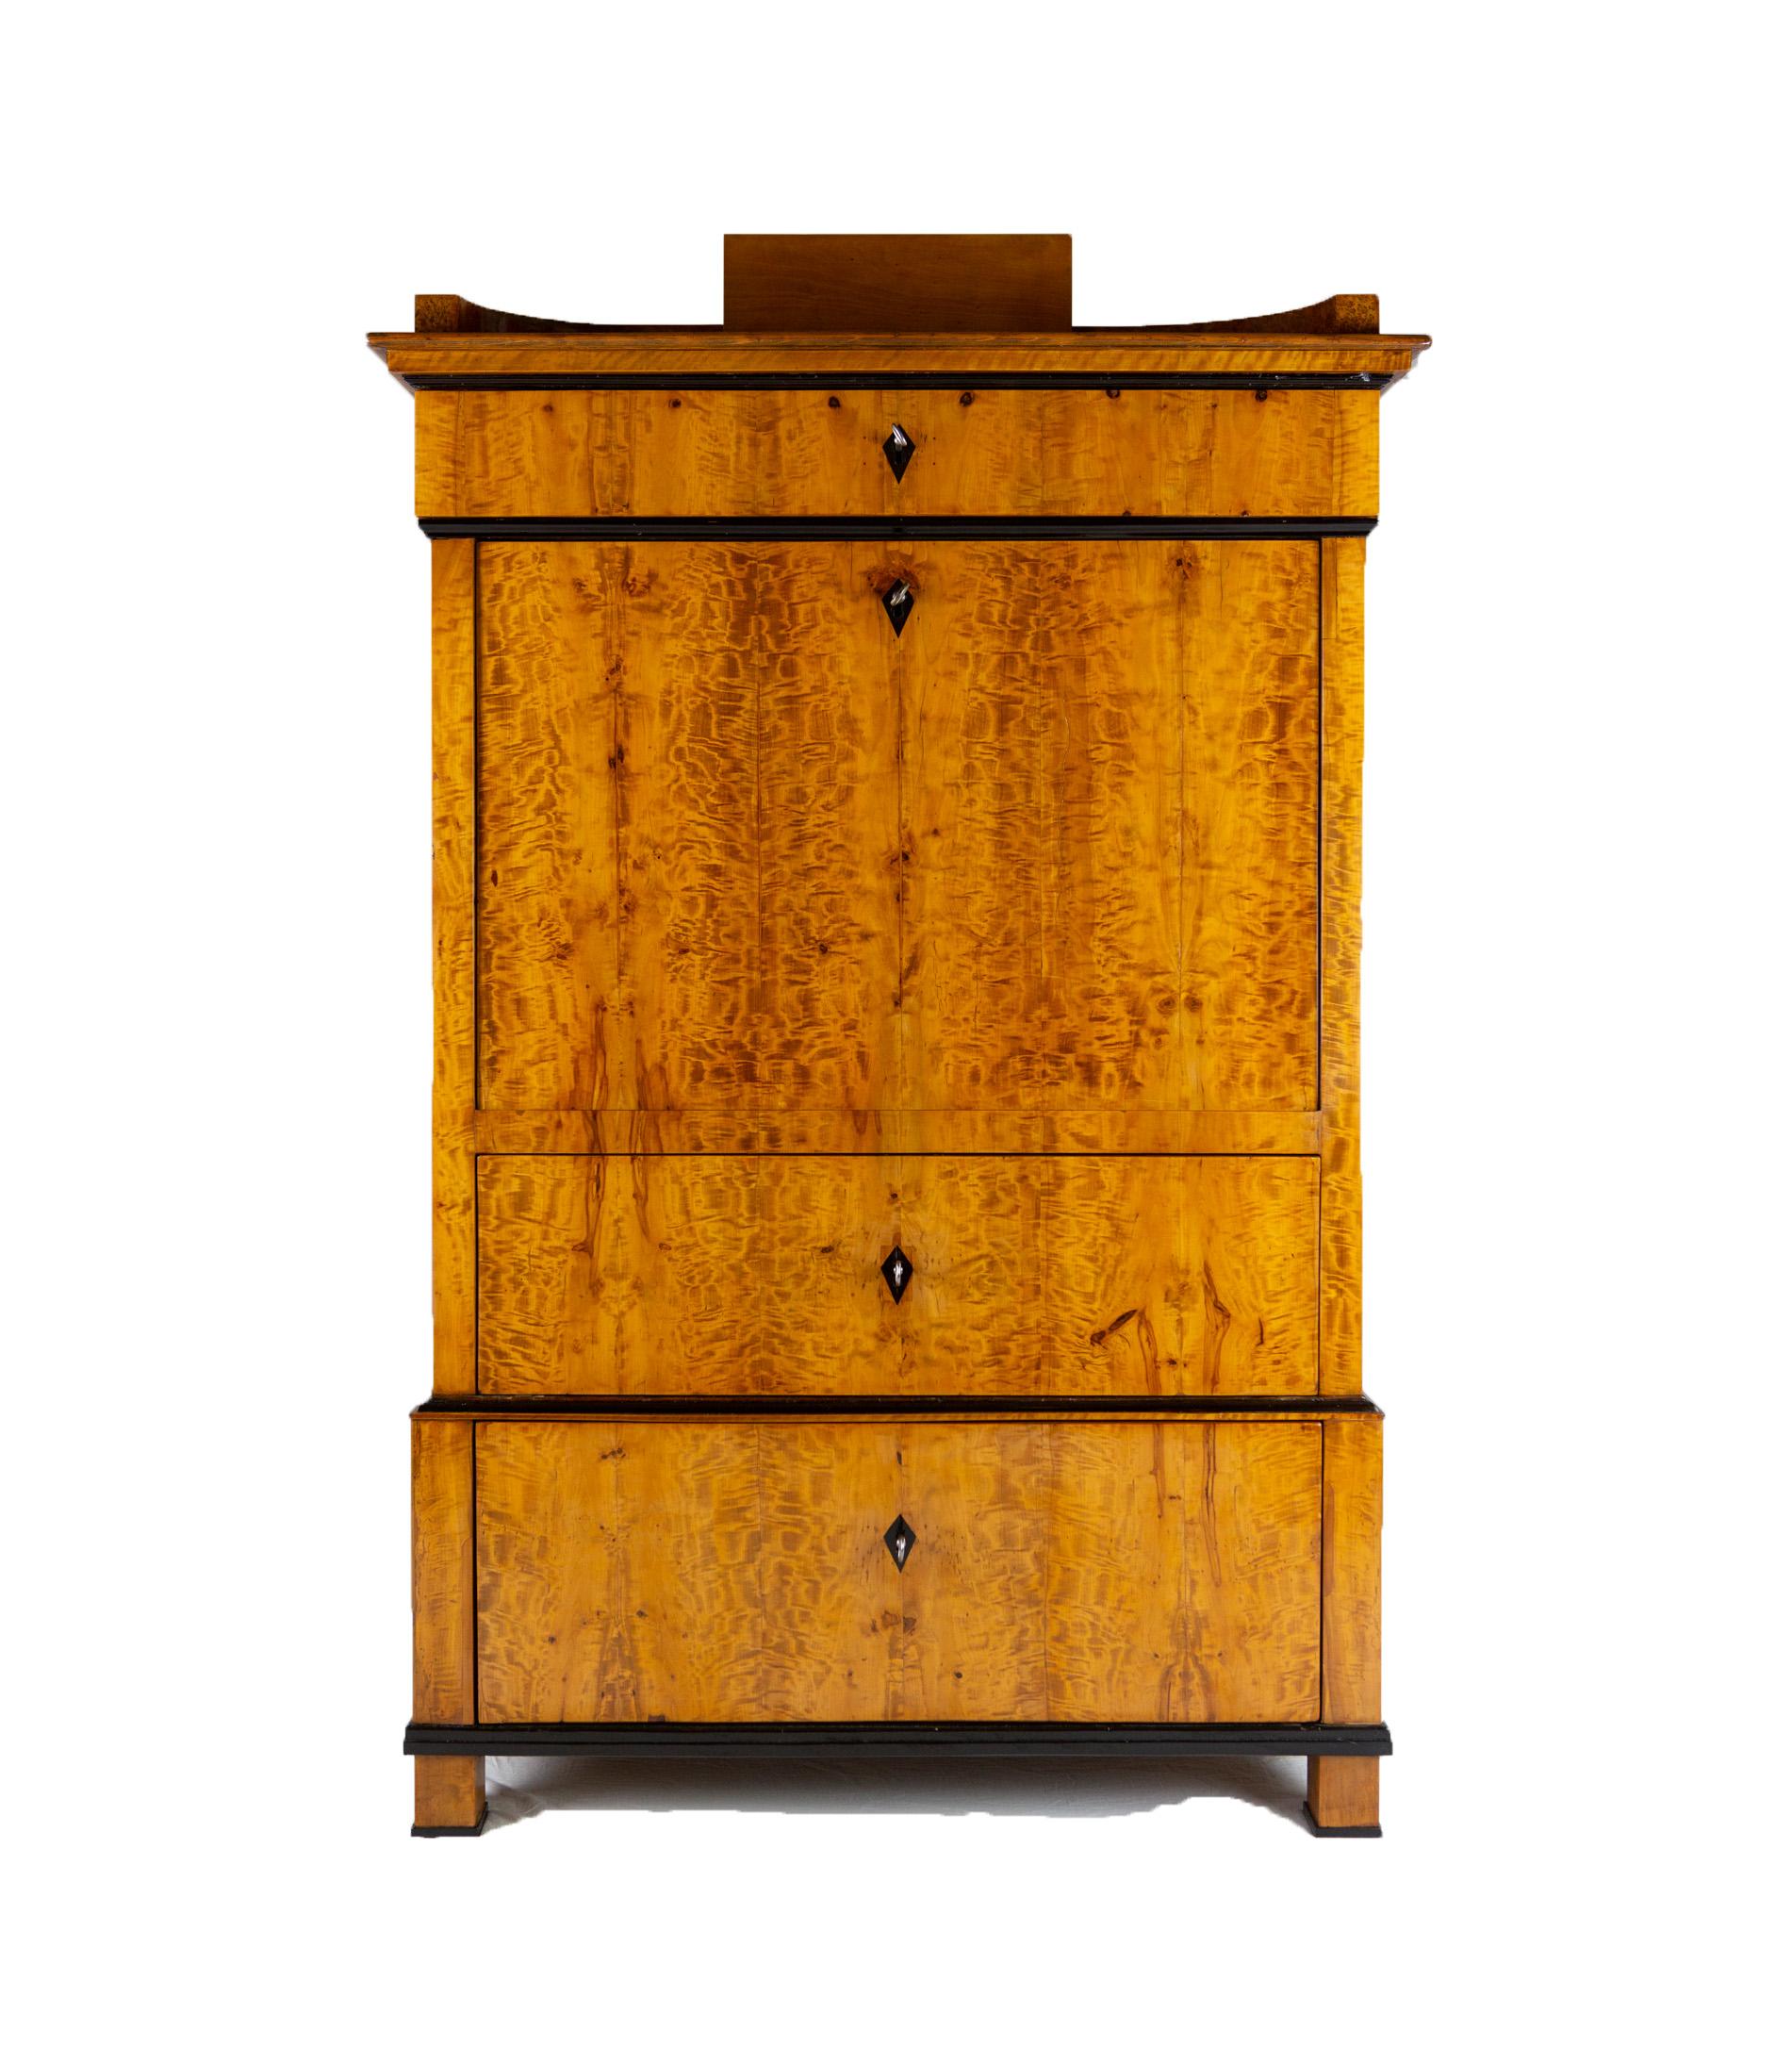 Exceptional 19th century Biedermeier period secretary in birchwood veneer, circa 1830-1840 from Northern Germany. The secretary has two spacious drawers on the bottom and one drawer at the top. This piece is ready for residential use and in restored